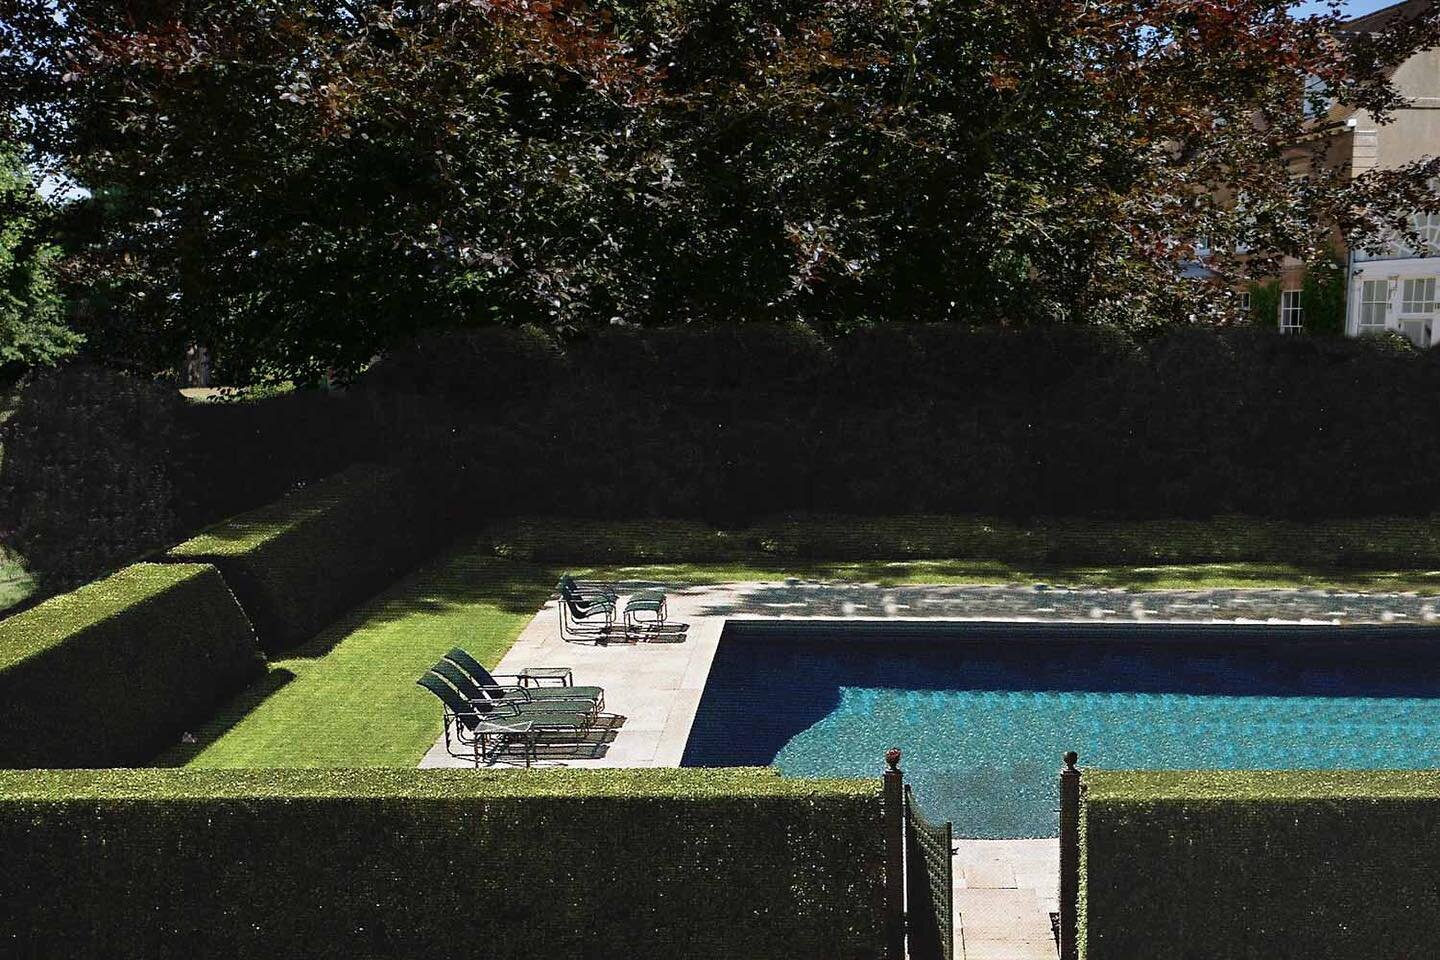 Your own private oasis&hellip;our design for a new pool complex close to the house creates privacy with a two layered hedge carefully placed to allow for a choice of sun or shade, grass or paving, around the entire perimeter.

#georgian #georgianarch